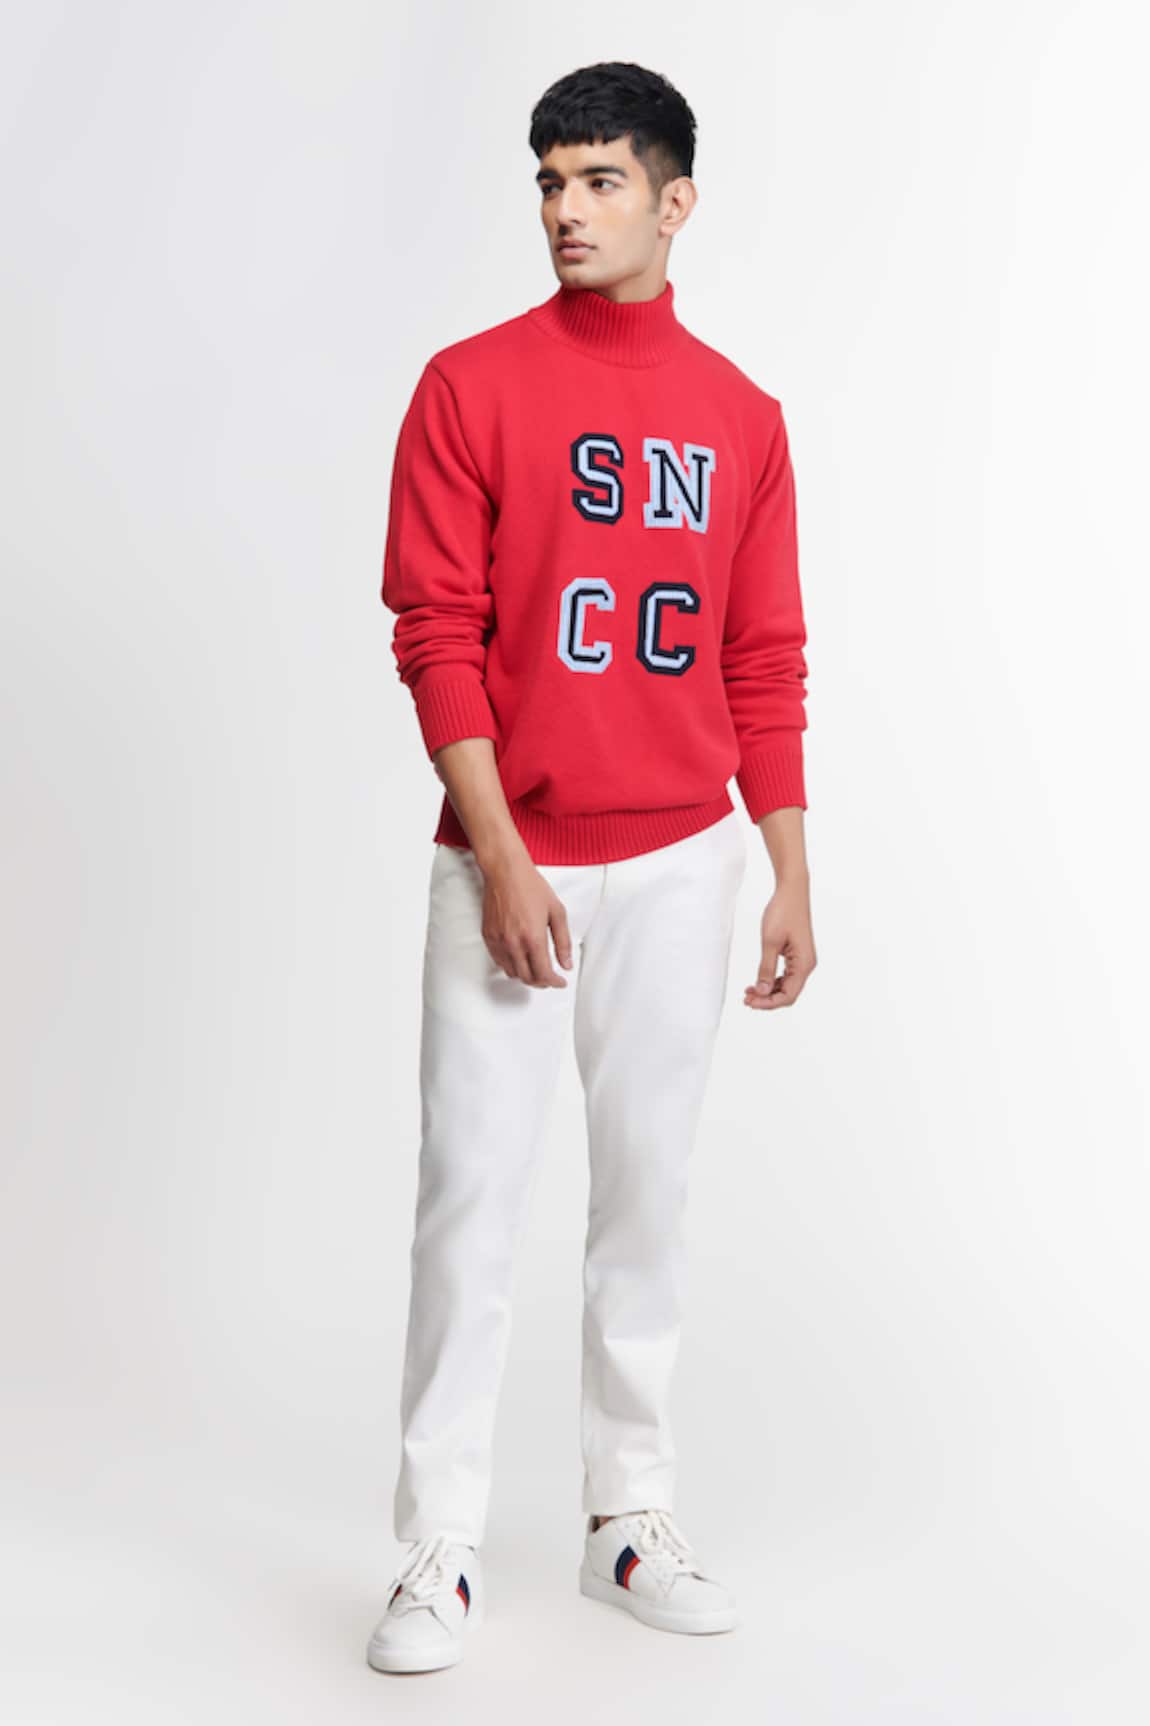 S&N by Shantnu Nikhil Knitted Patchwork Sweater